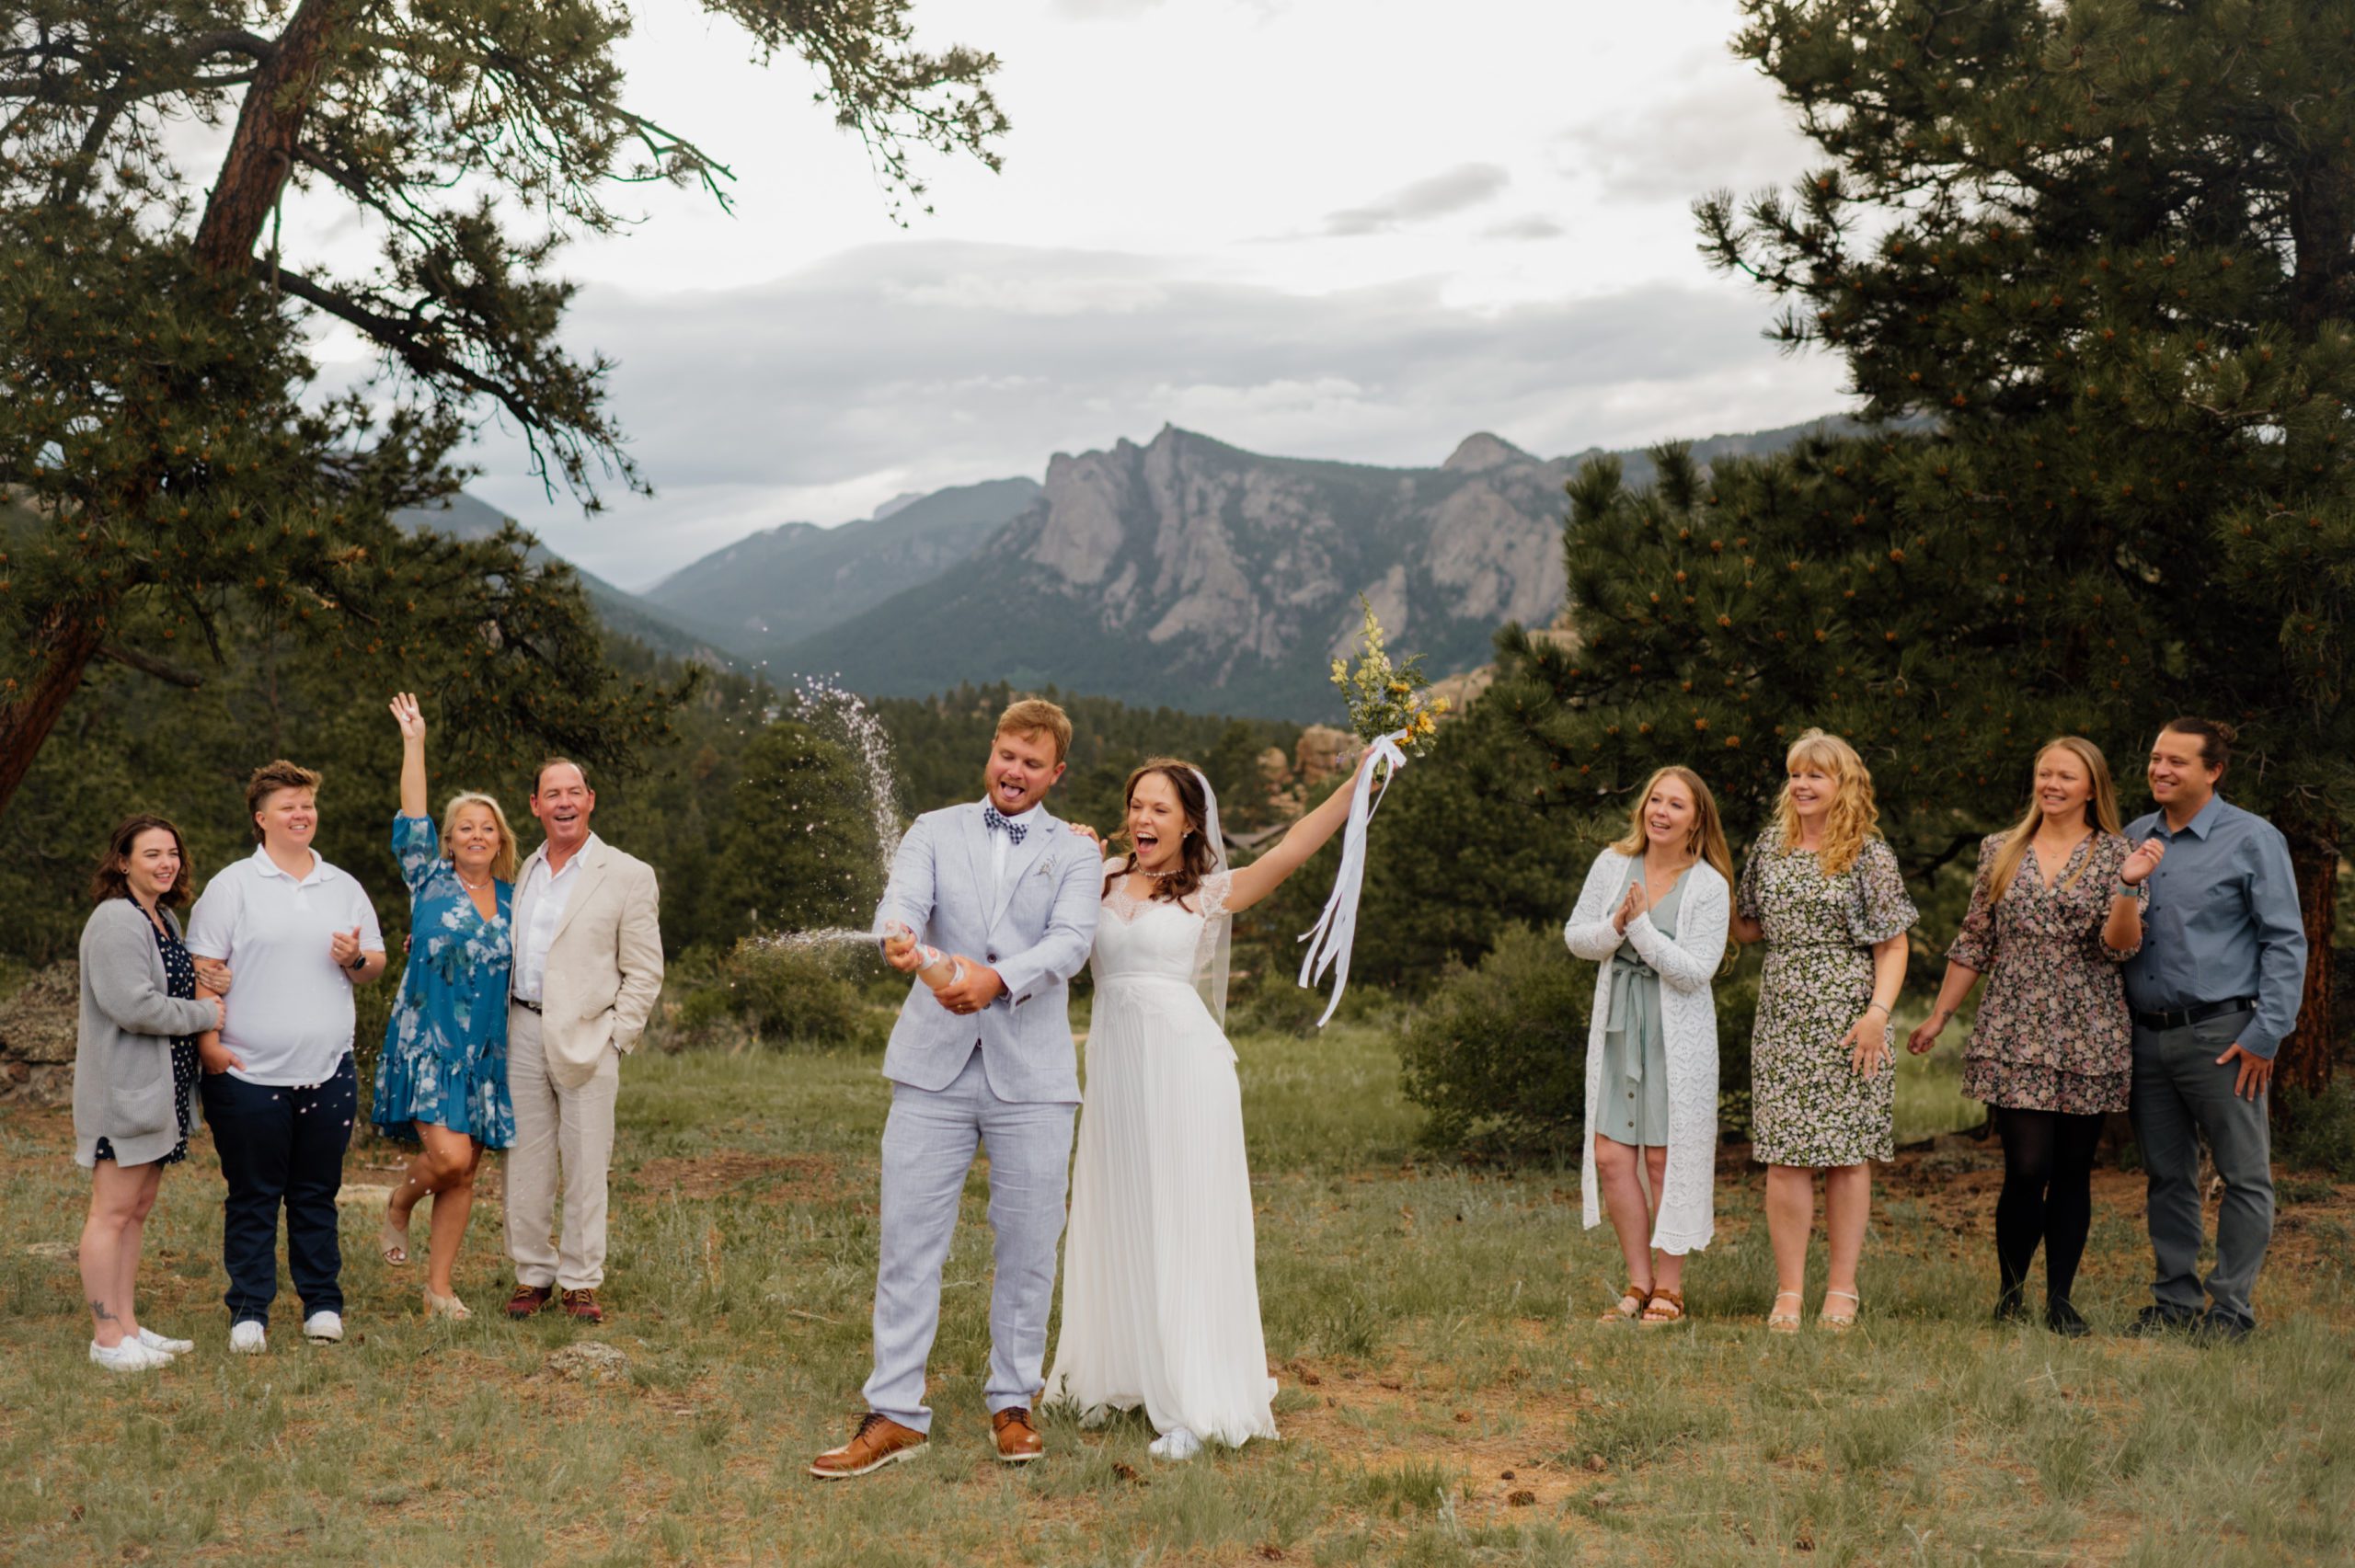 The bride and groom pop a bottle of champagne after their elopement ceremony at Knoll Willows in Estes Park.